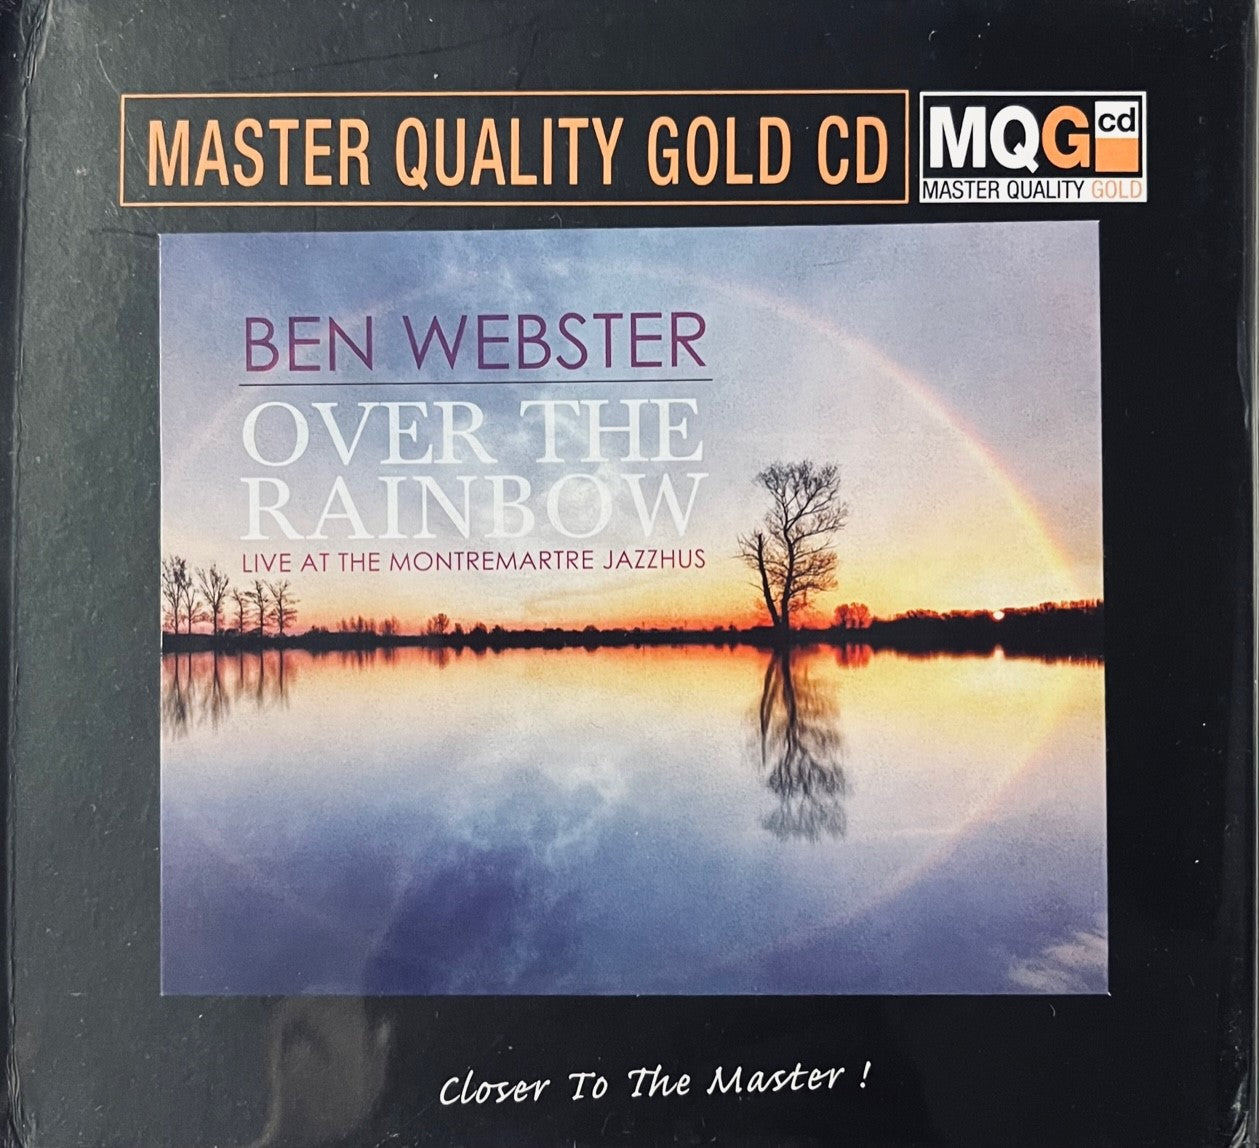 BEN WEBSTER - OVER THE RAINBOW - LIVE AT THE MONTREMARTRE JAZZHUS (MQGCD) CD